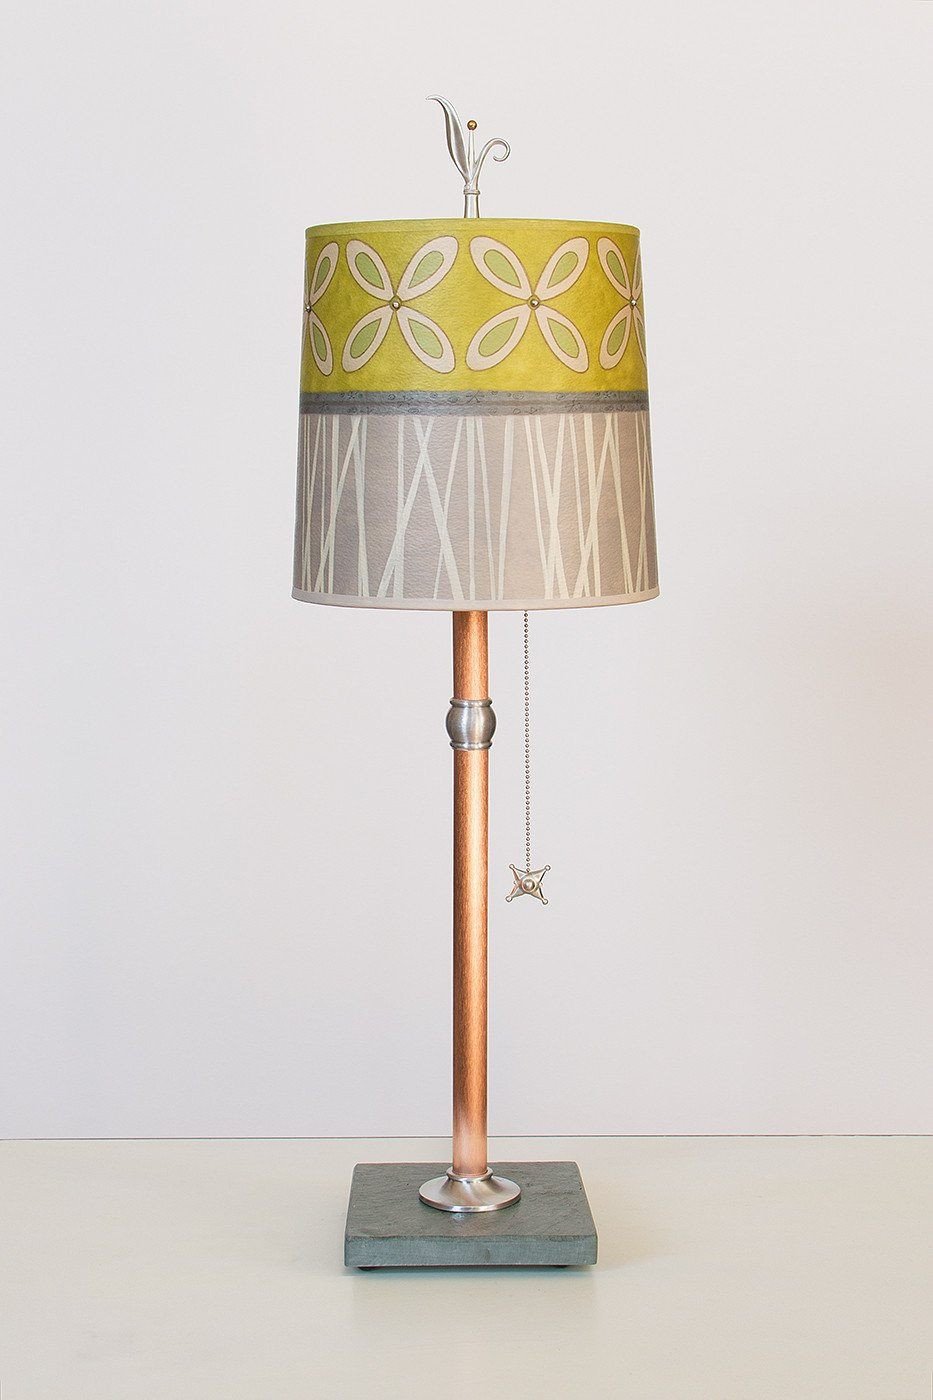 Copper Table Lamp with Medium Drum Shade in Kiwi